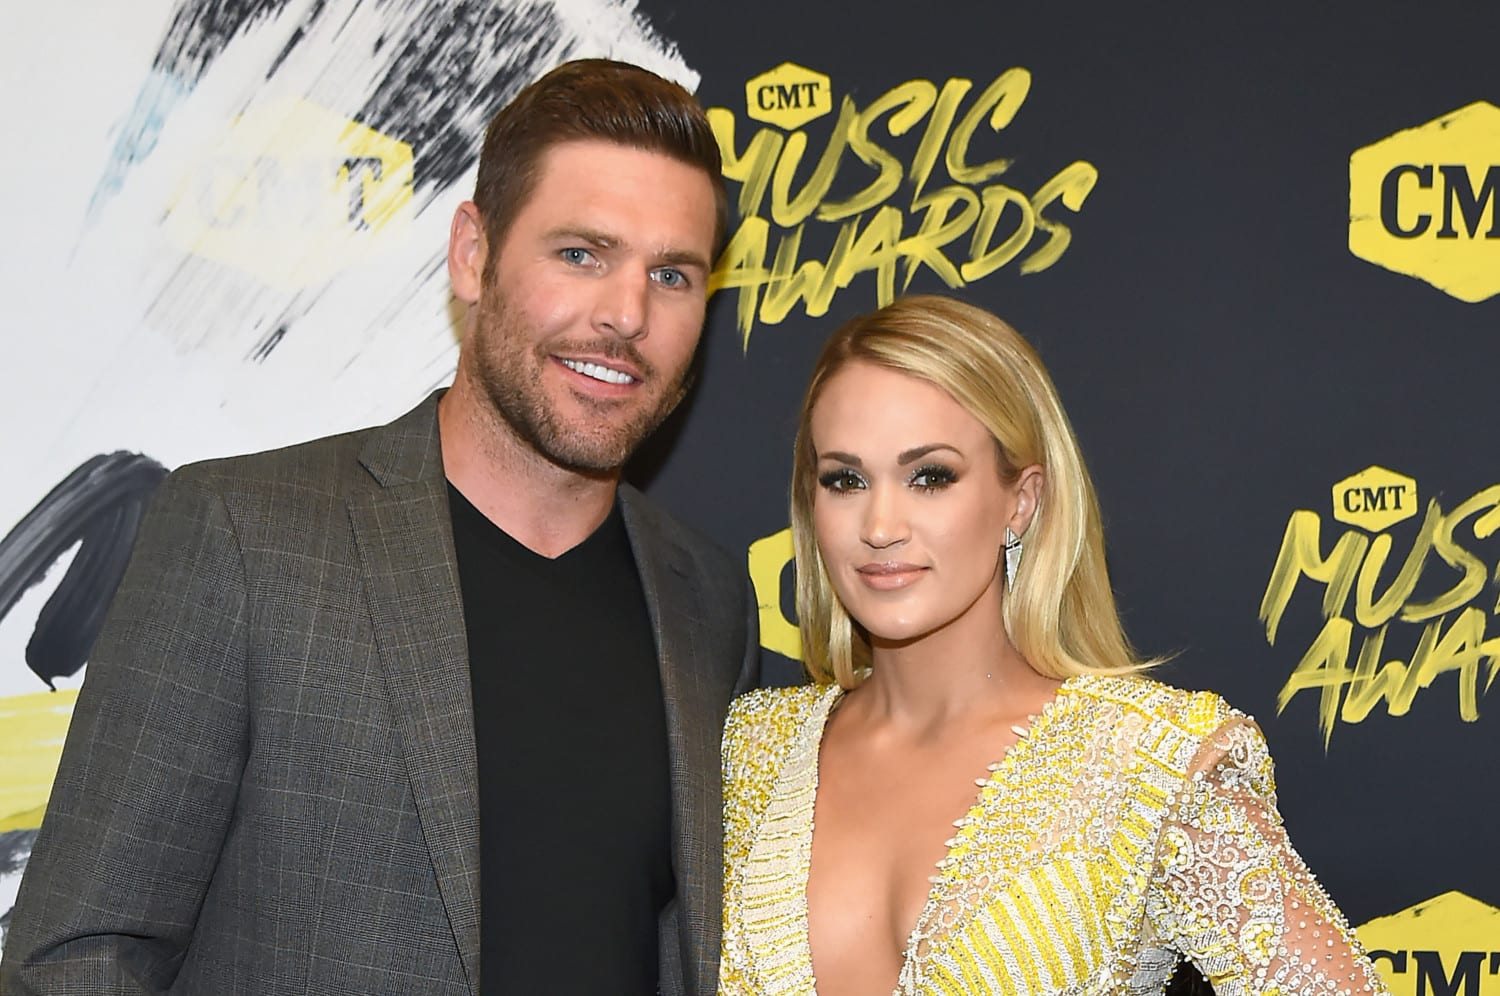 Carrie Underwood mike fisher photo